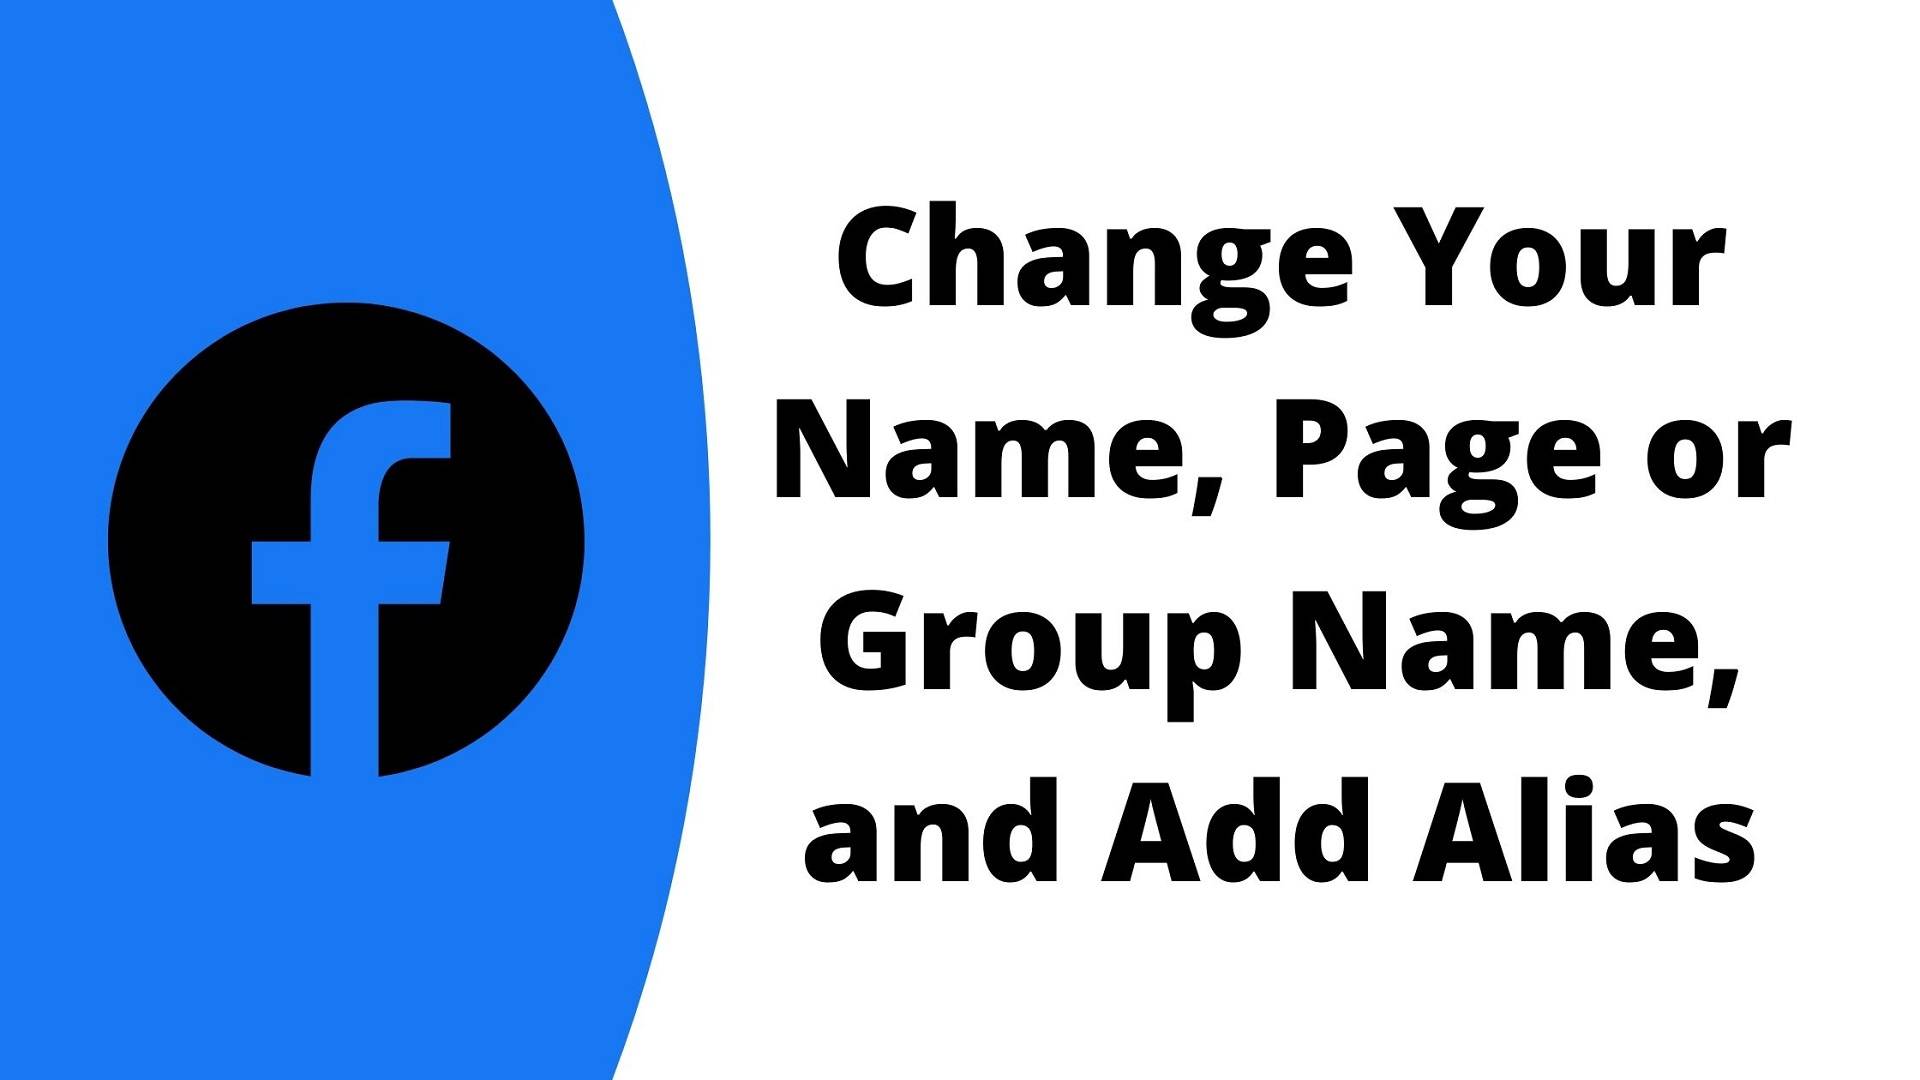 How to Change Your Name on Facebook Website or App?